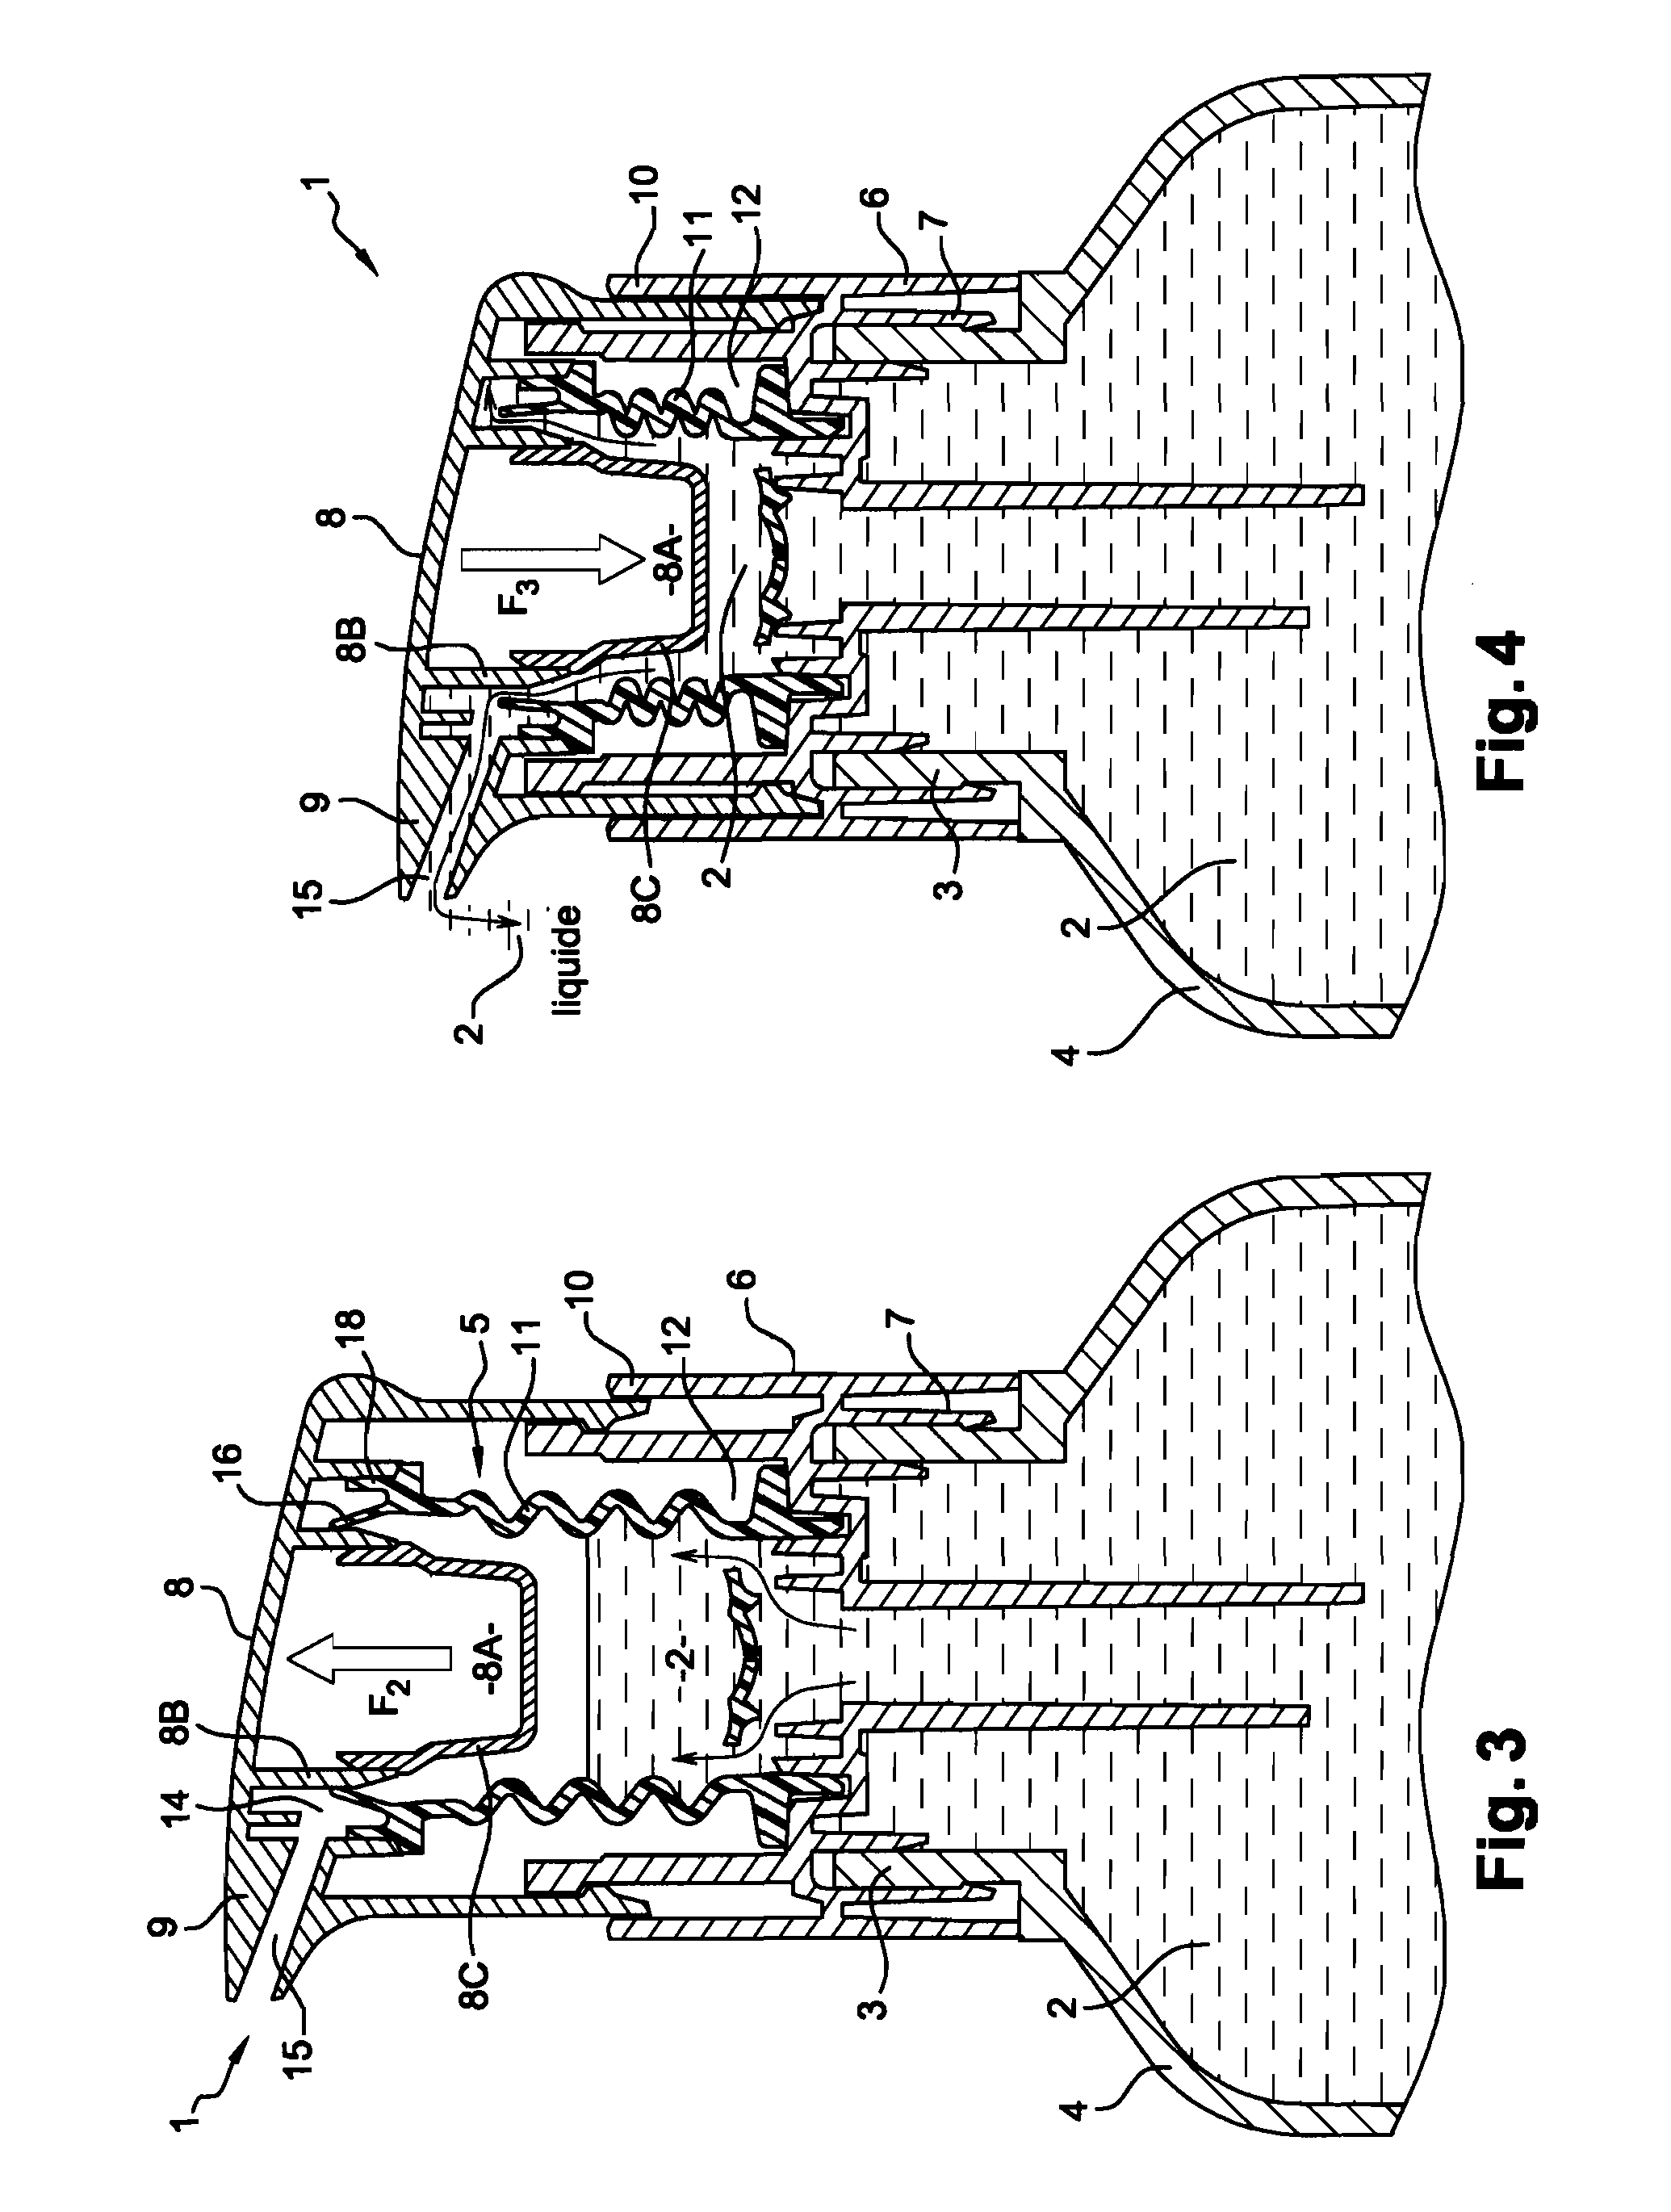 Device for dispensing a liquid-to-pasty product using a metering pump having a low dead volume